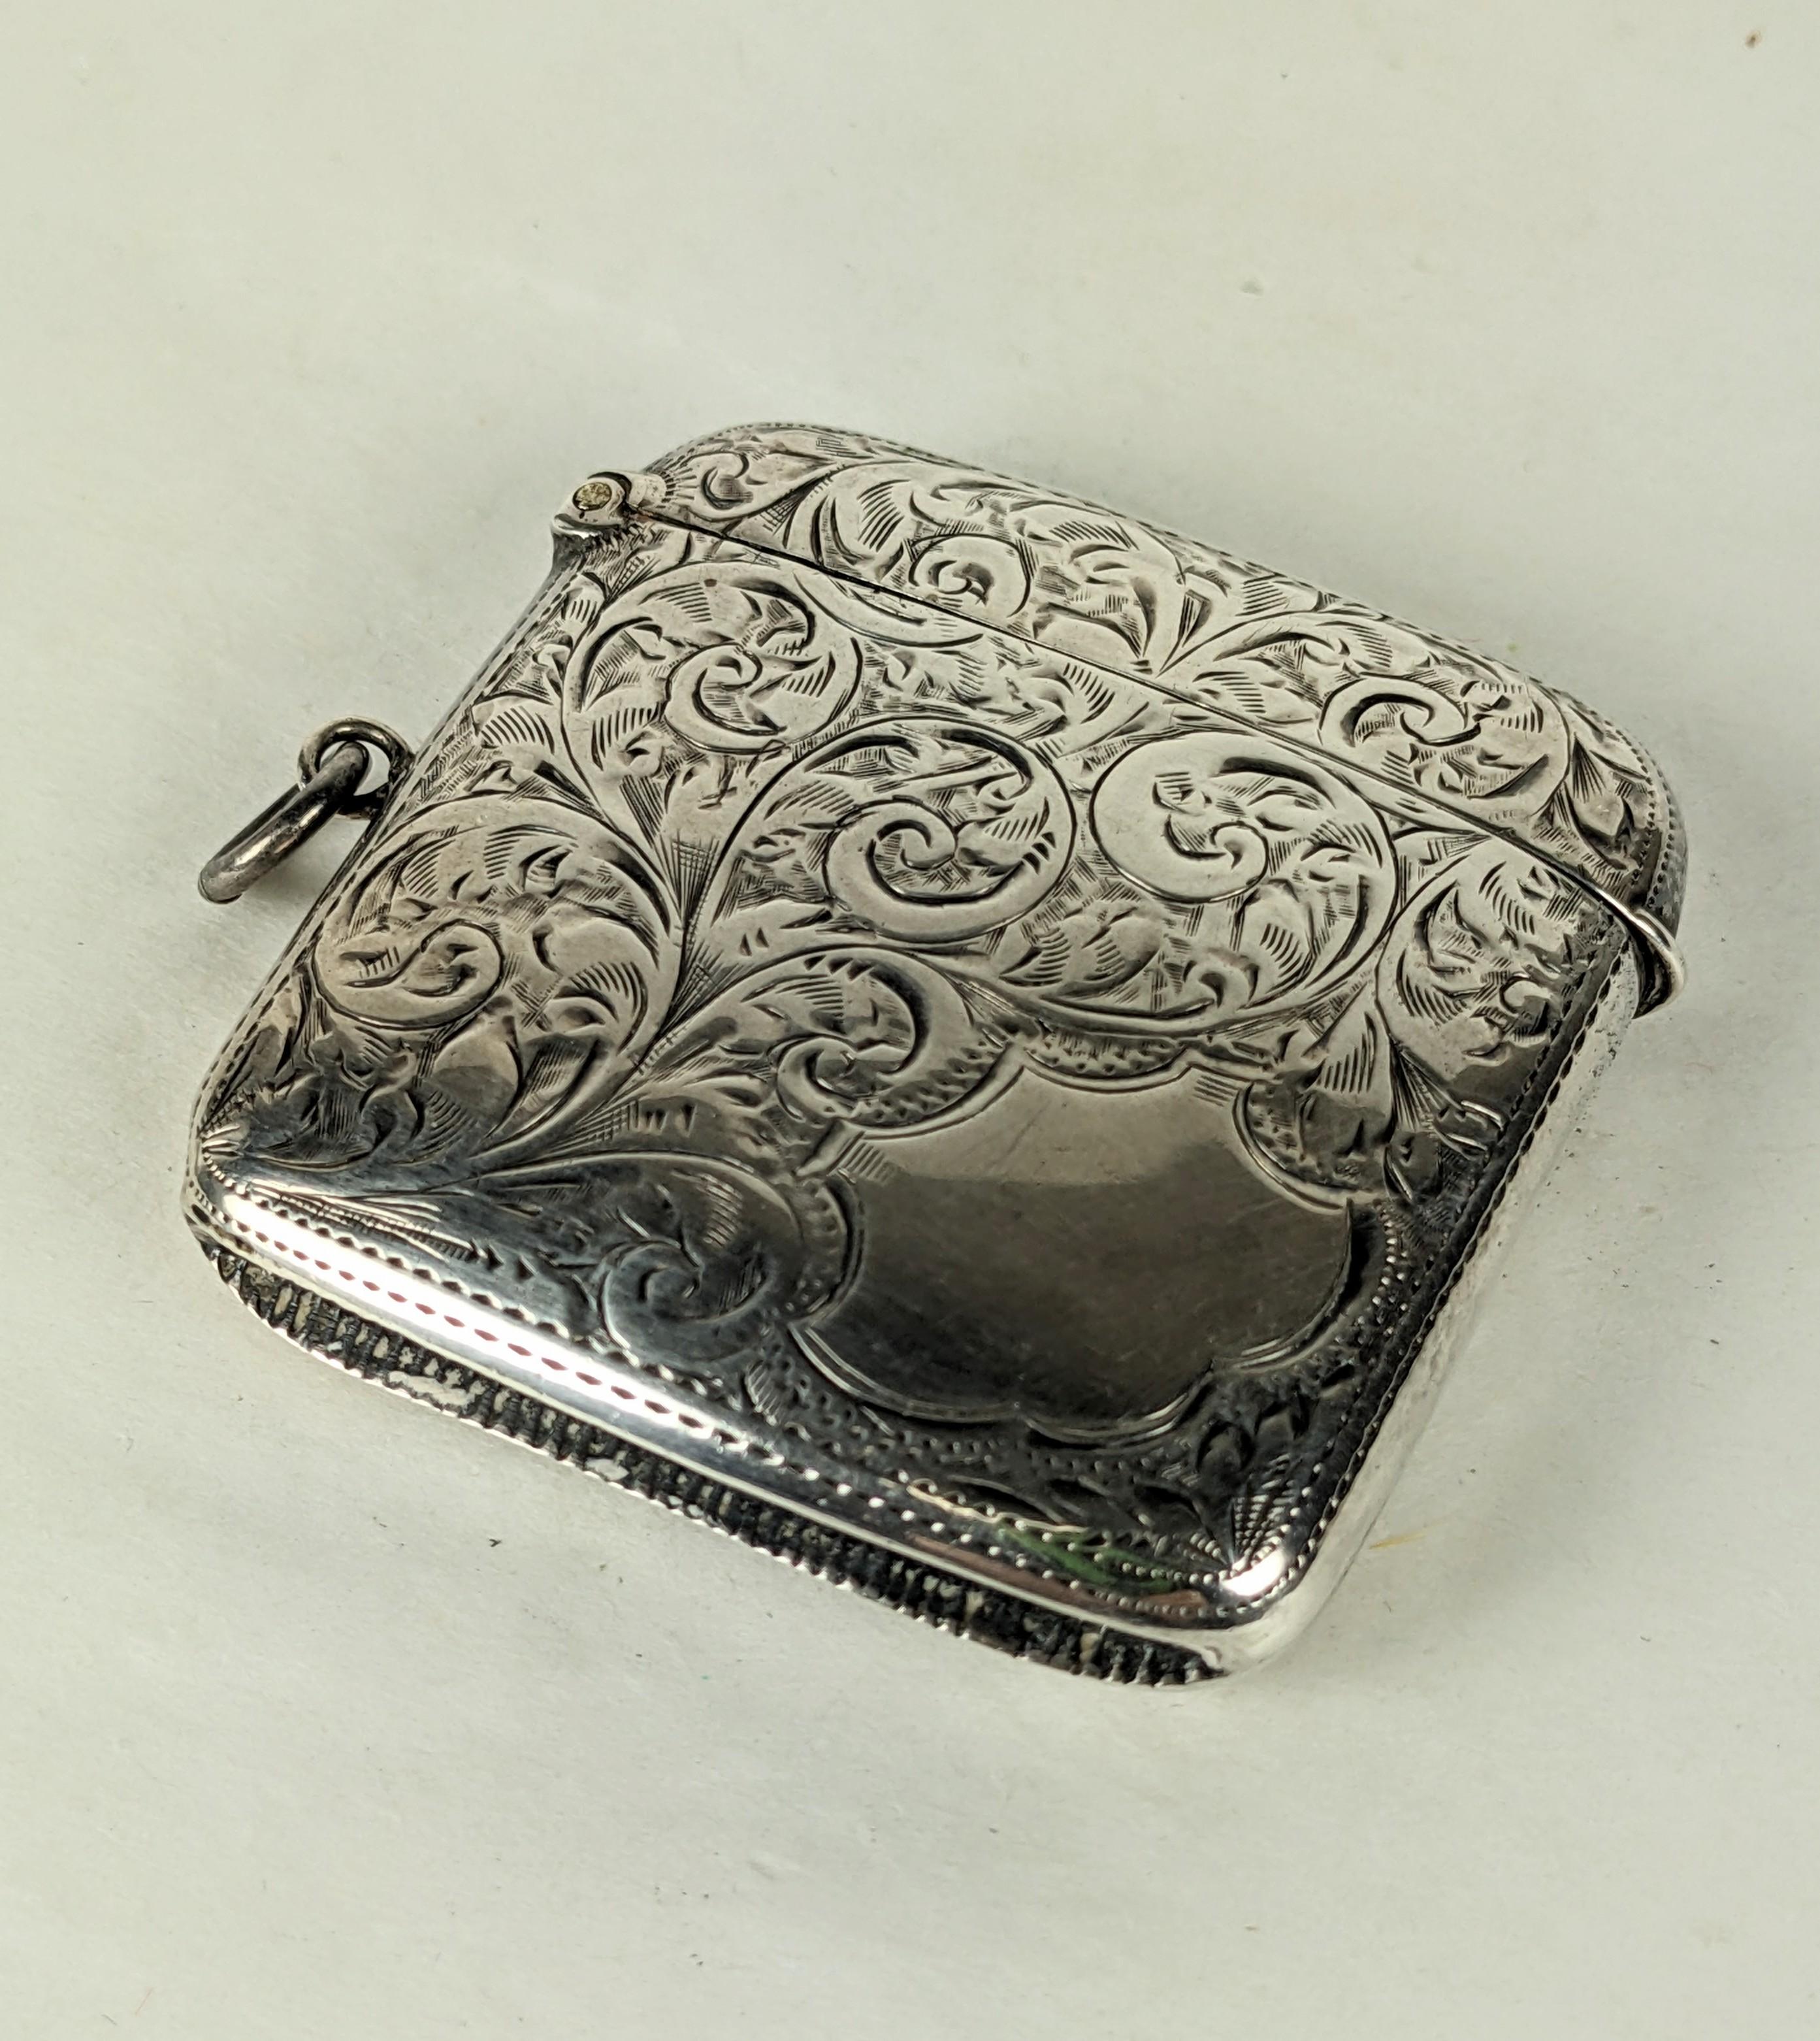 Lovely Victorian Sterling Etched Match safe from the late 1900's UK. Hand etched with ornate scroll patterns with a cartouche which was added for initials. 2